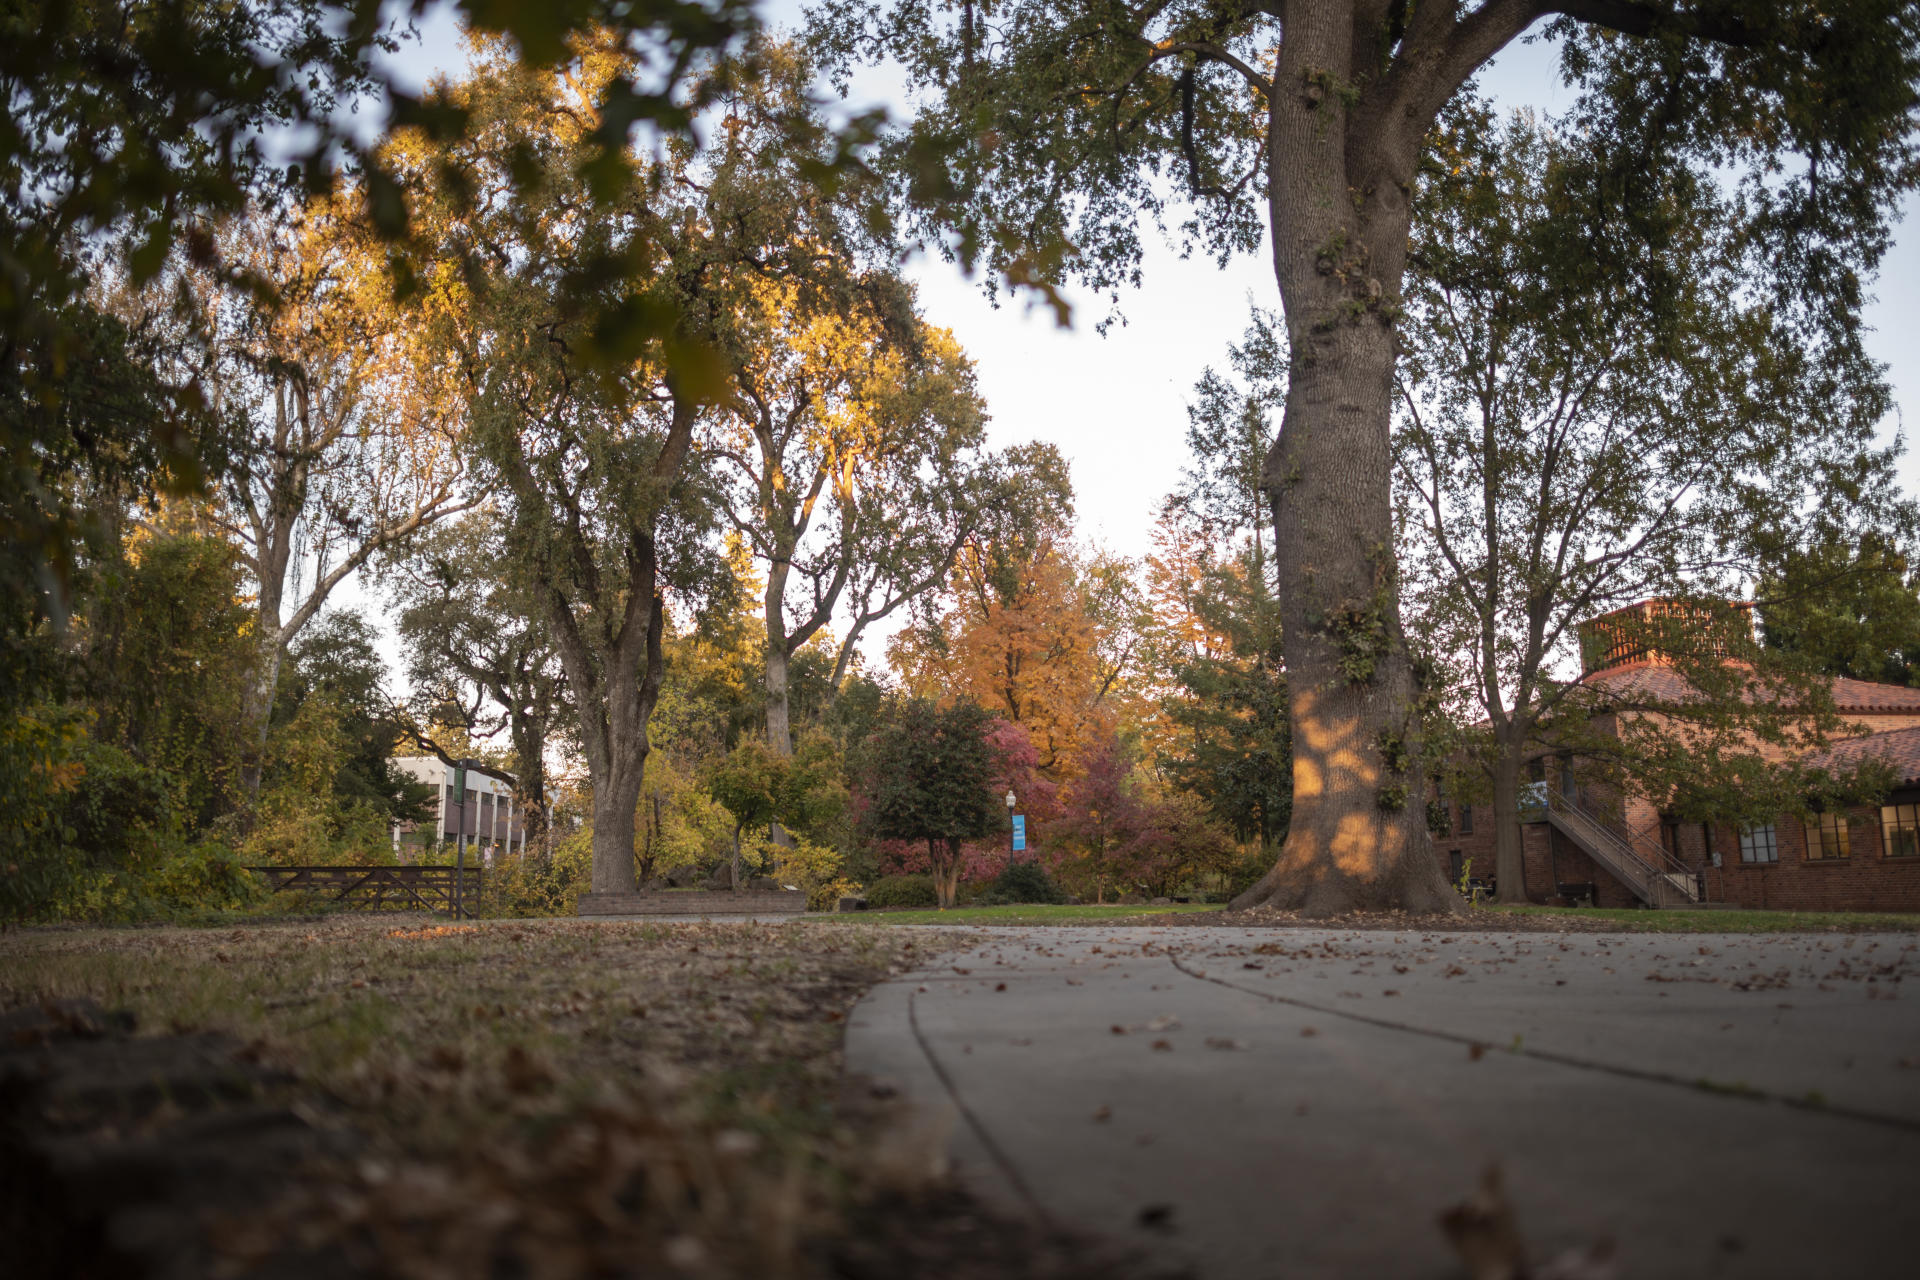 A sidewalk winds through campus and past large, majestic trees and leaves reflecting the fall season.